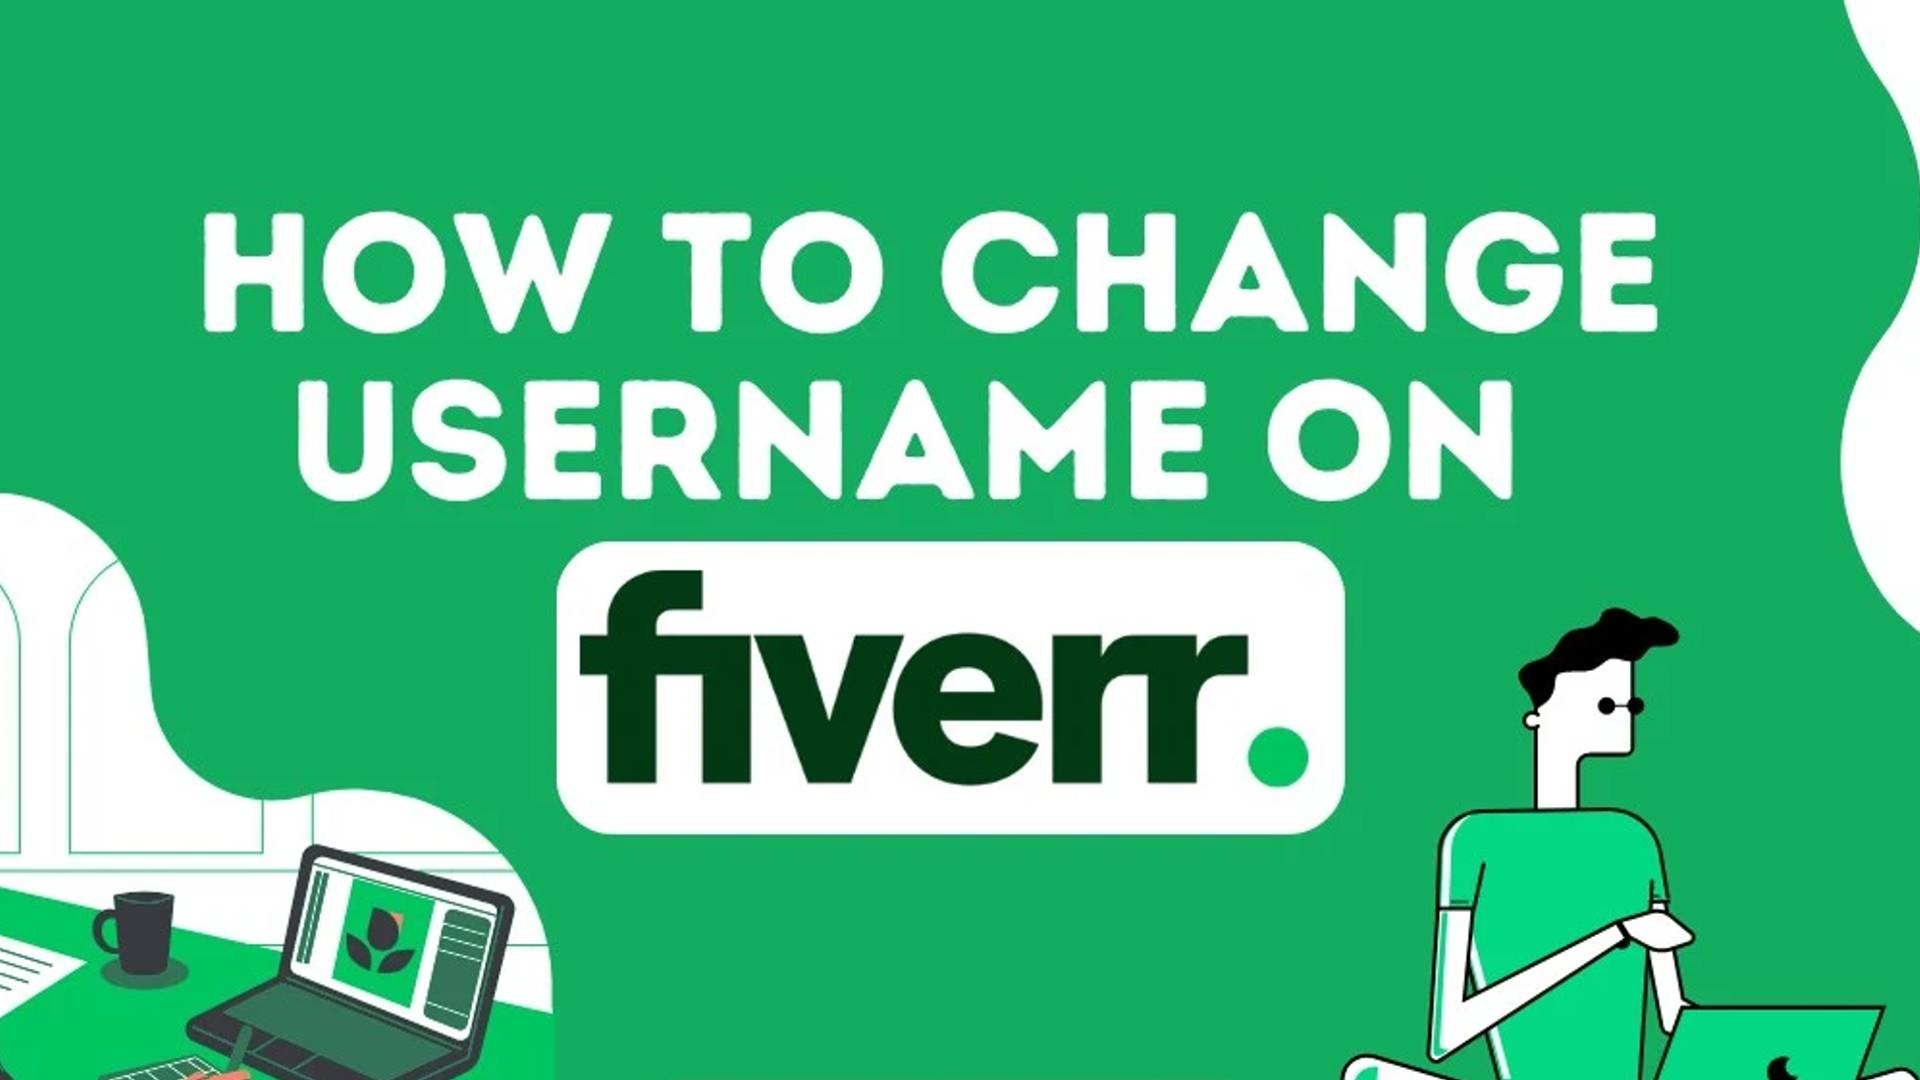 How To Change Username On Fiverr